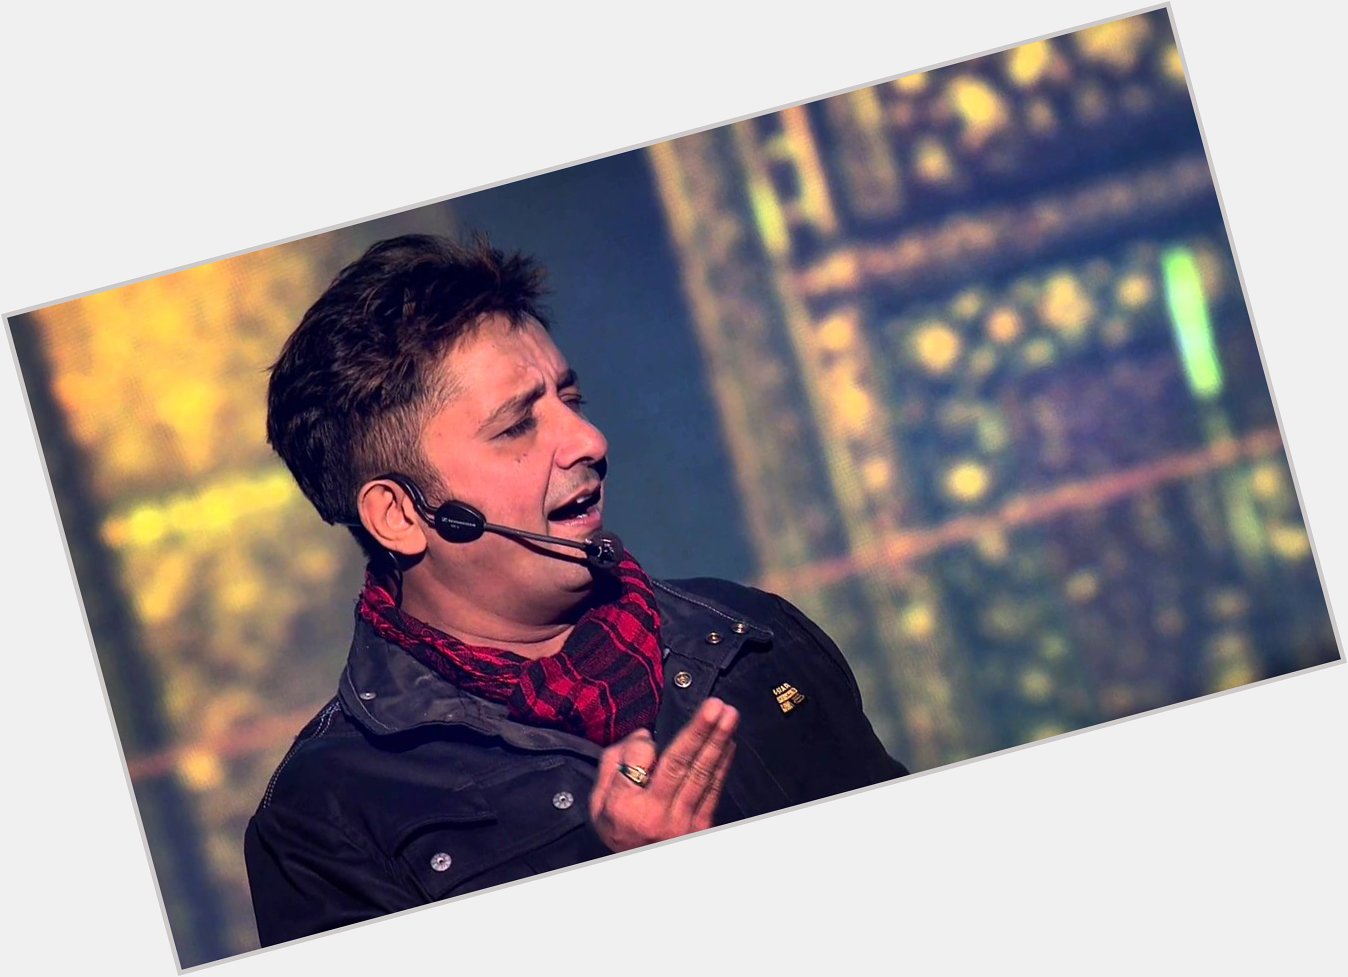 Wishing Sukhwinder Singh a very Happy Birthday! Dance to his hit song from Biwi No.1 here -  